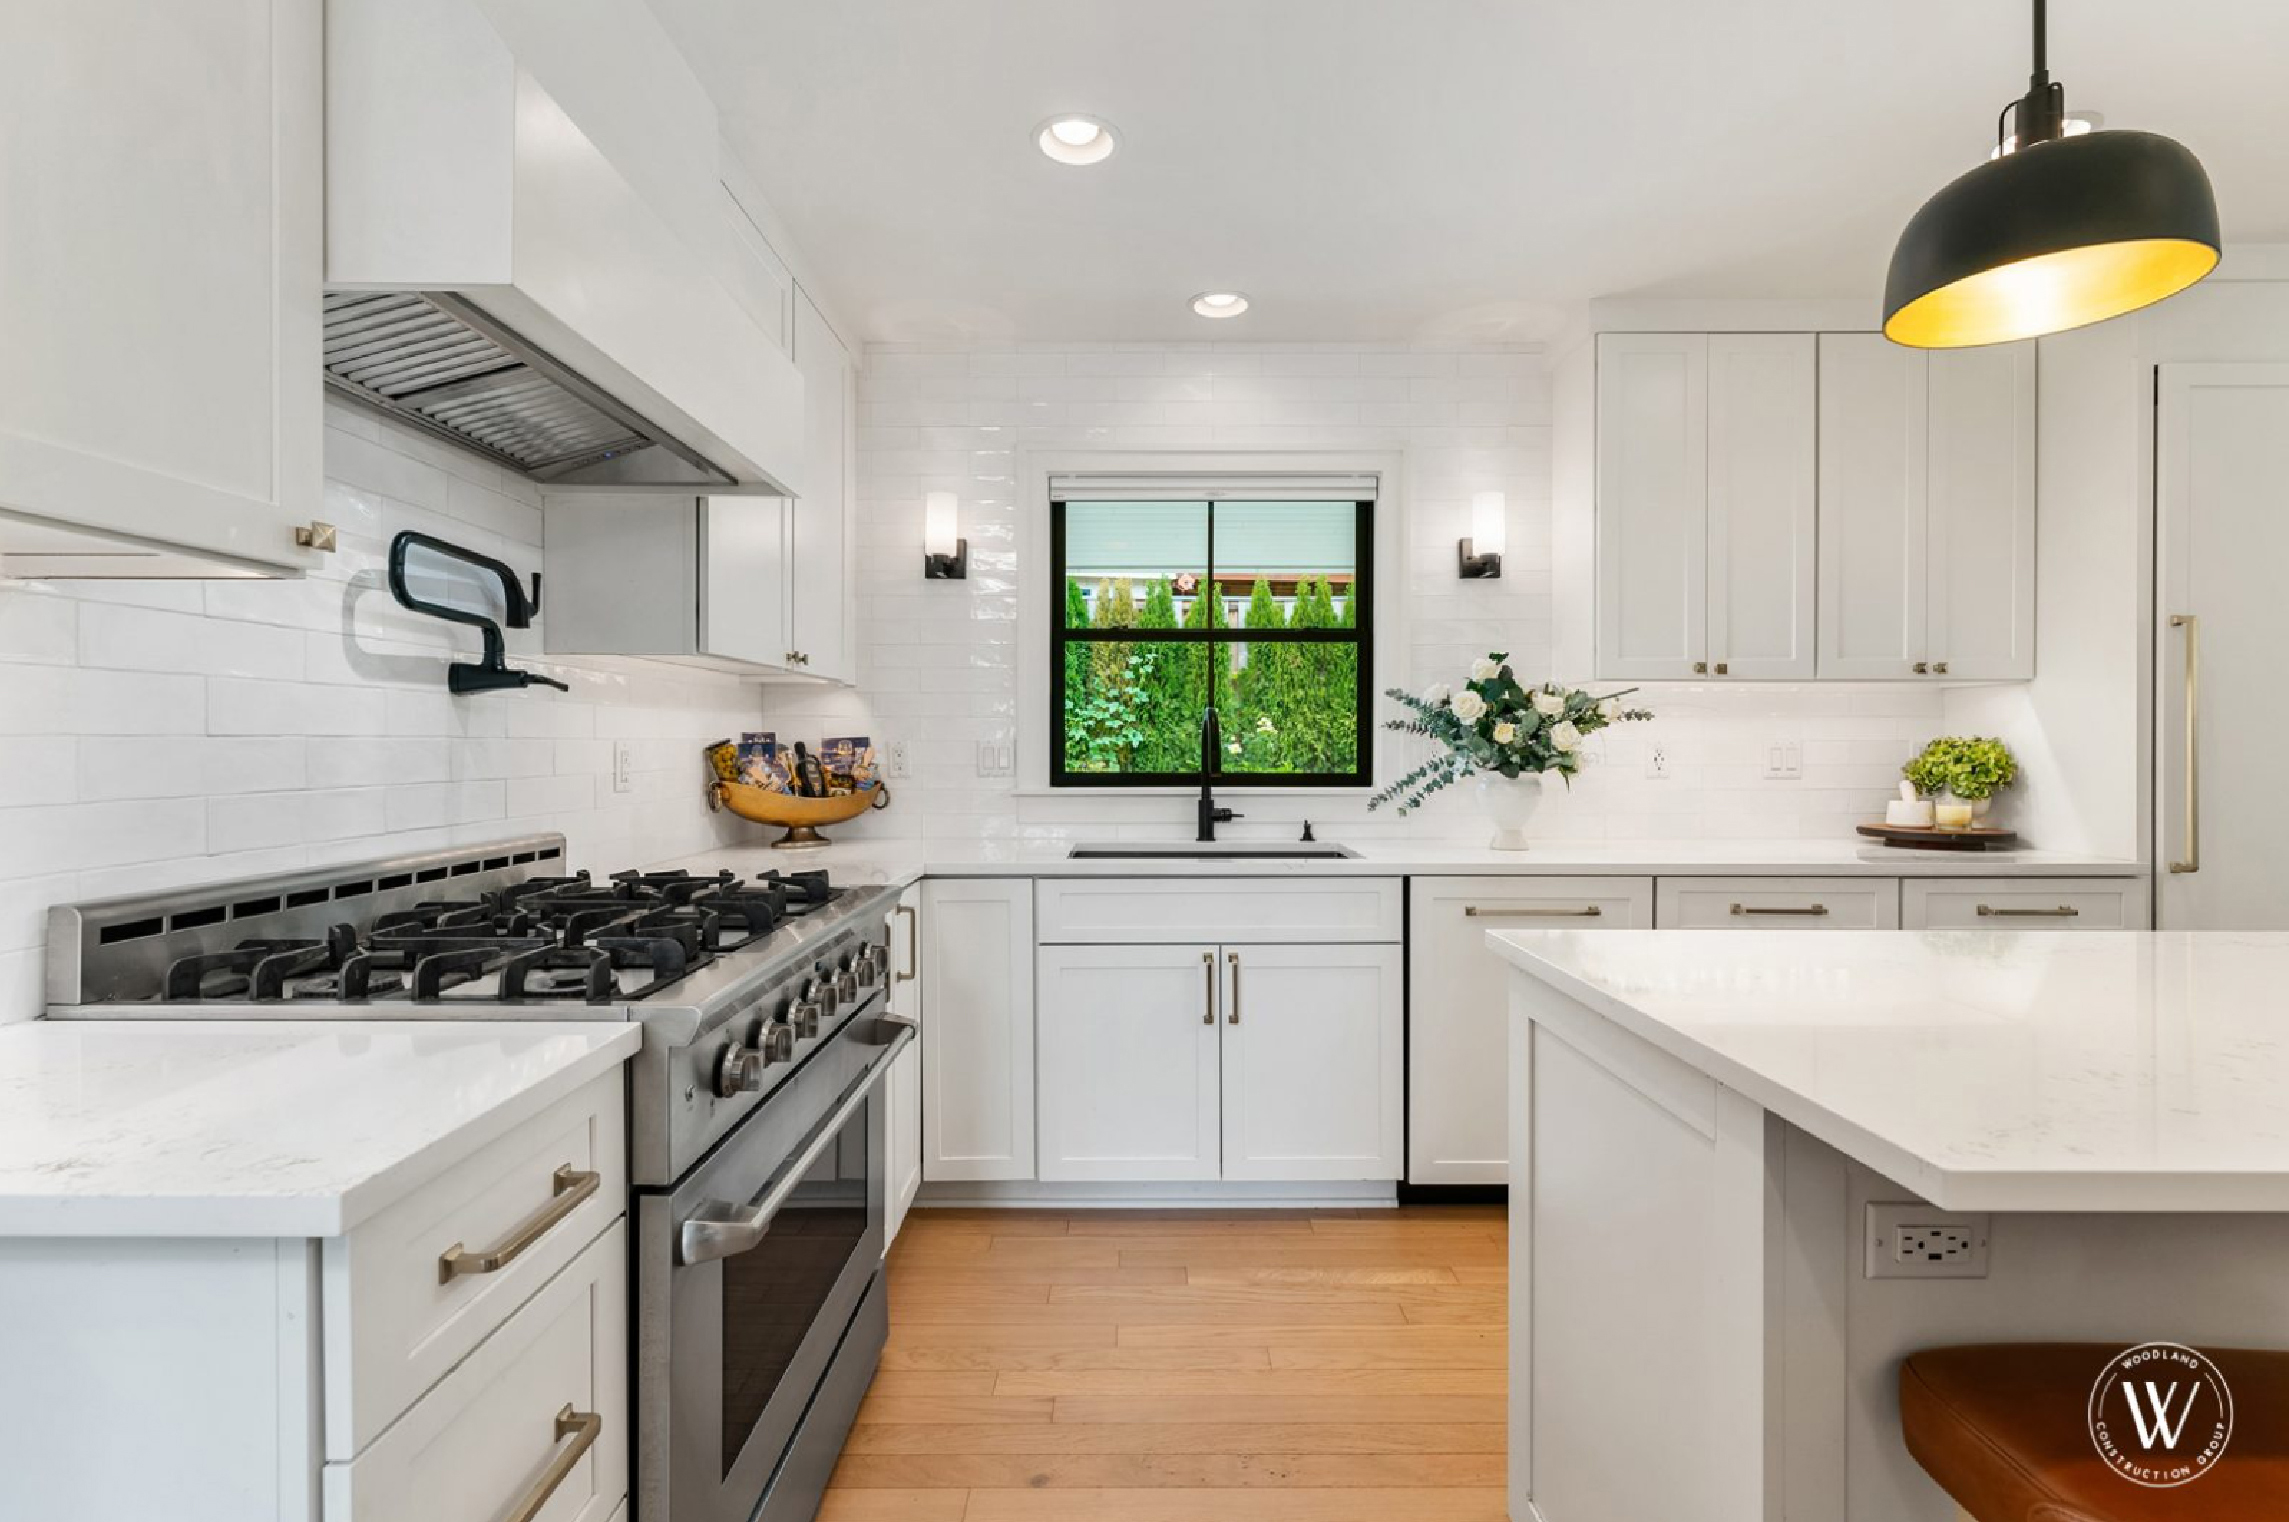 Kitchen Pull & Replace Remodeling Cost in Portland, Or -Woodland Construction Group